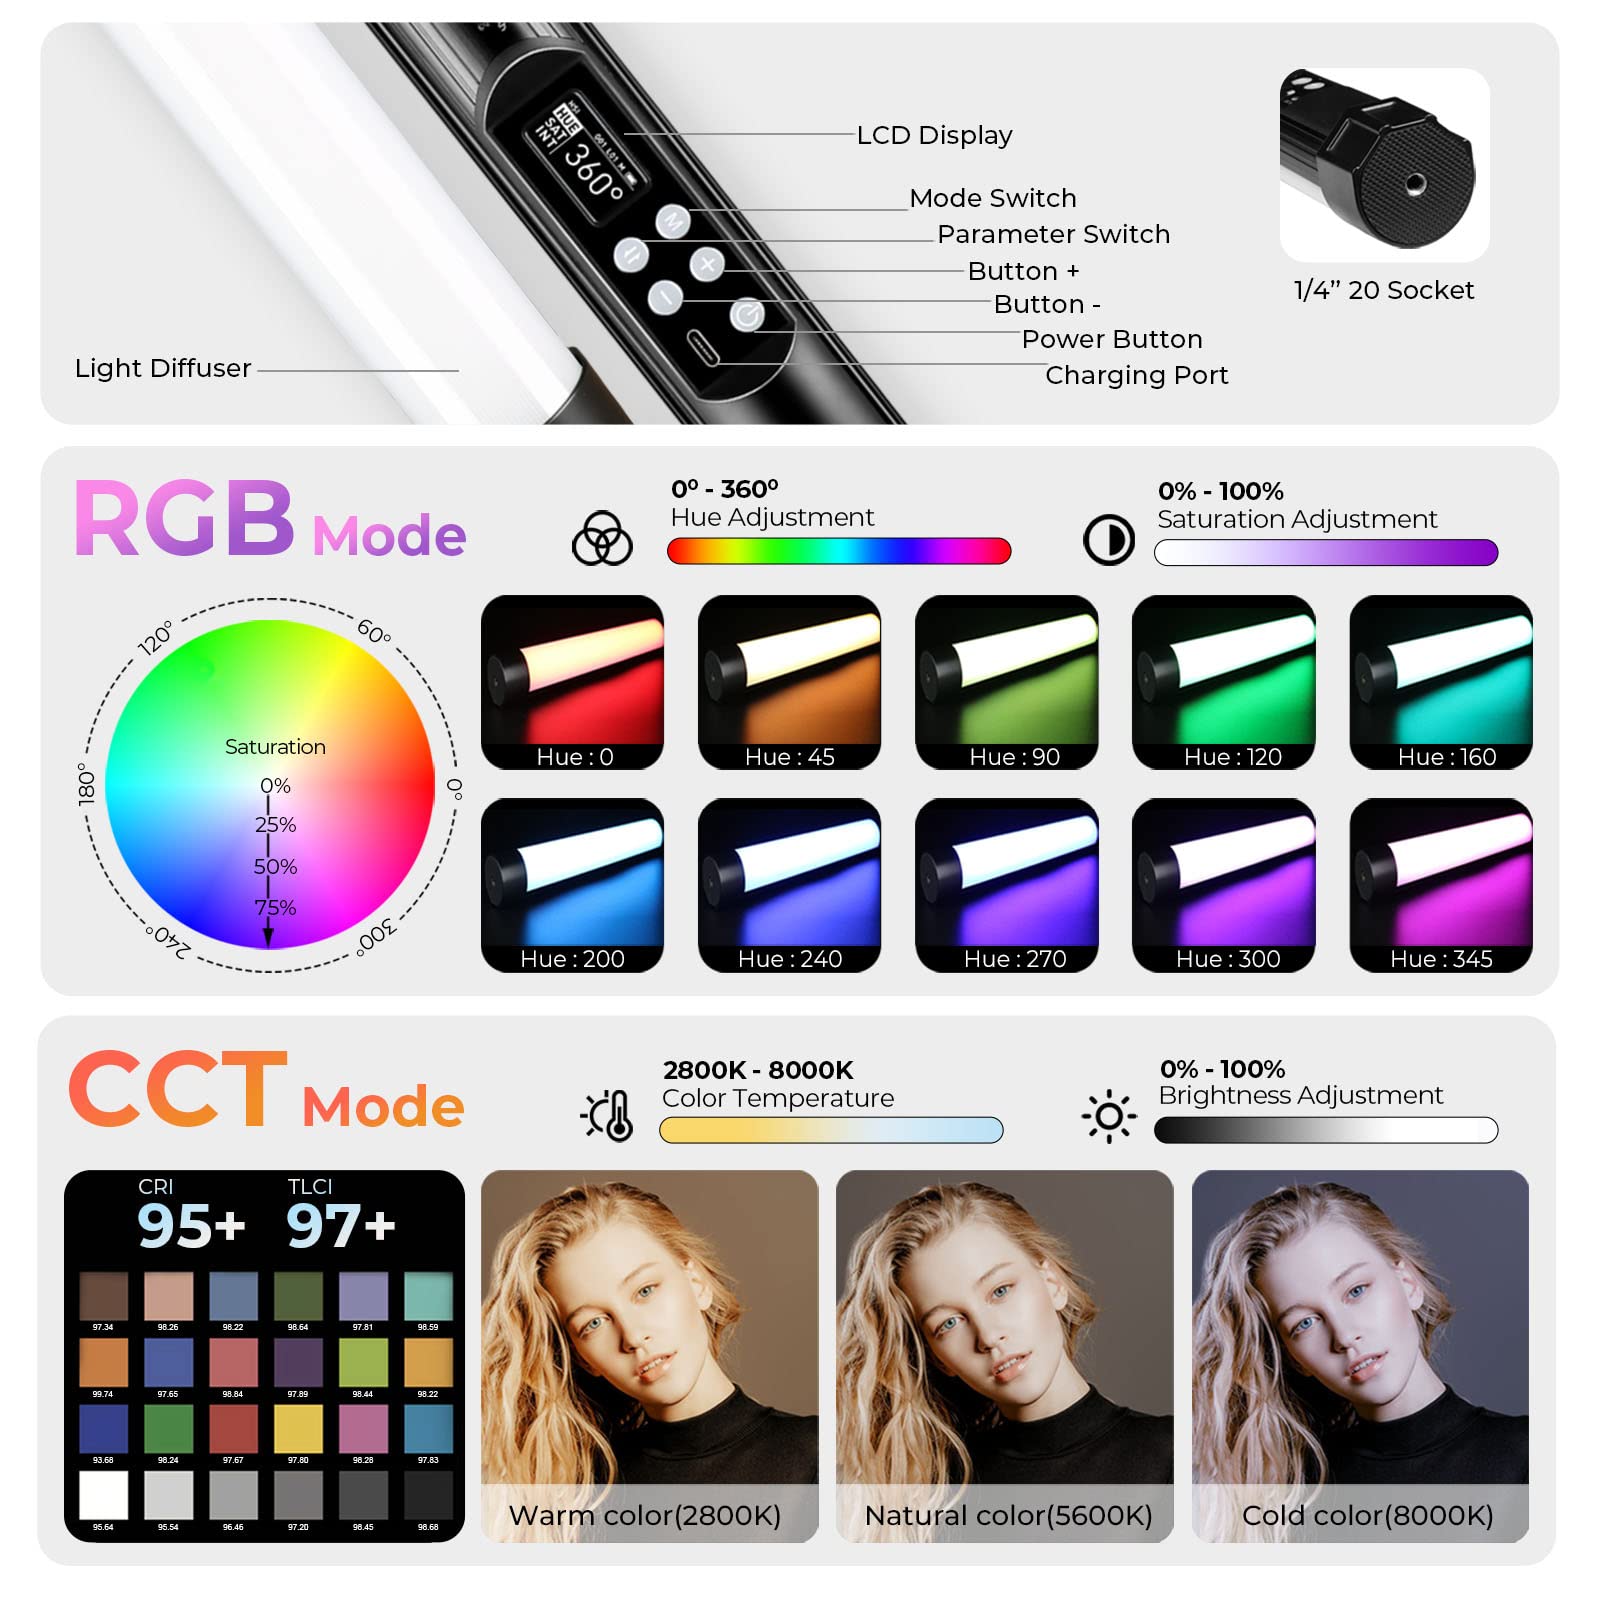 Mettlelite TLX4 RGB Tube Light LED Full Color Video Light with APP DMX Control 4 ft 2800K-8000K CRI96 TLCI97 360° RGB CCT HSI Mode 10 Customizable Light Effects Built in Rechargeable Battery